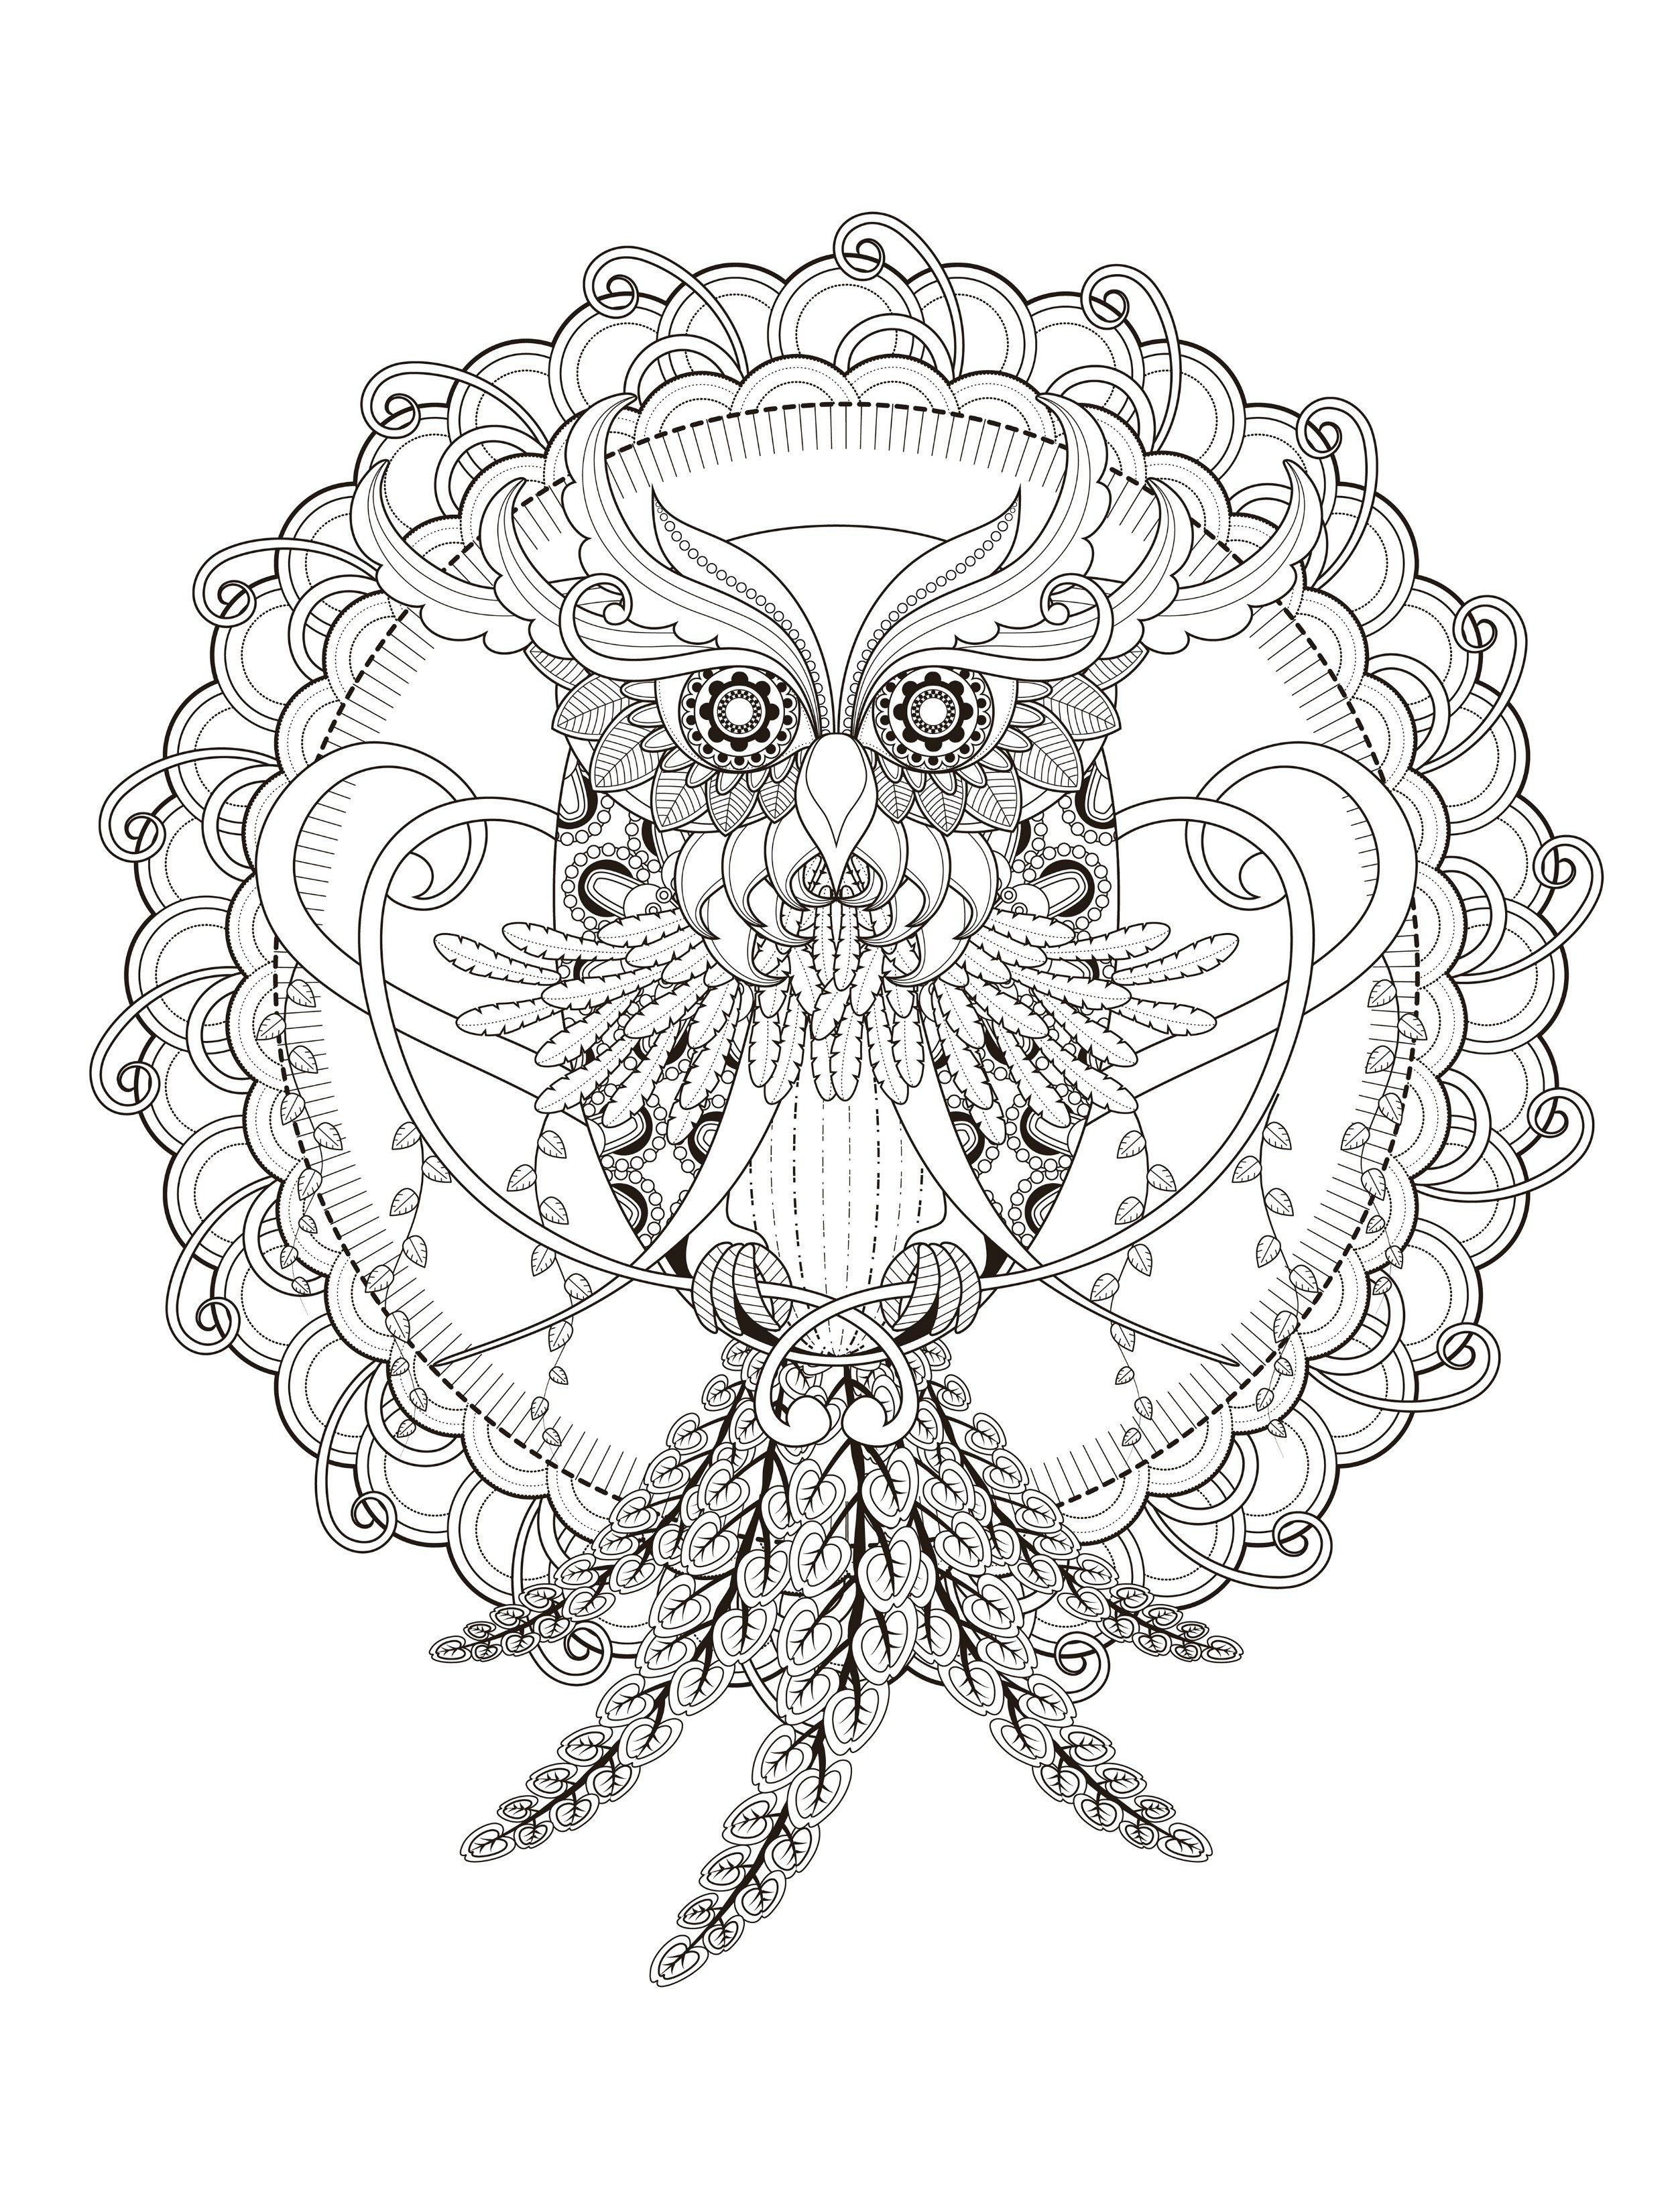 Adult Coloring Pages Owl
 23 Free Printable Insect & Animal Adult Coloring Pages